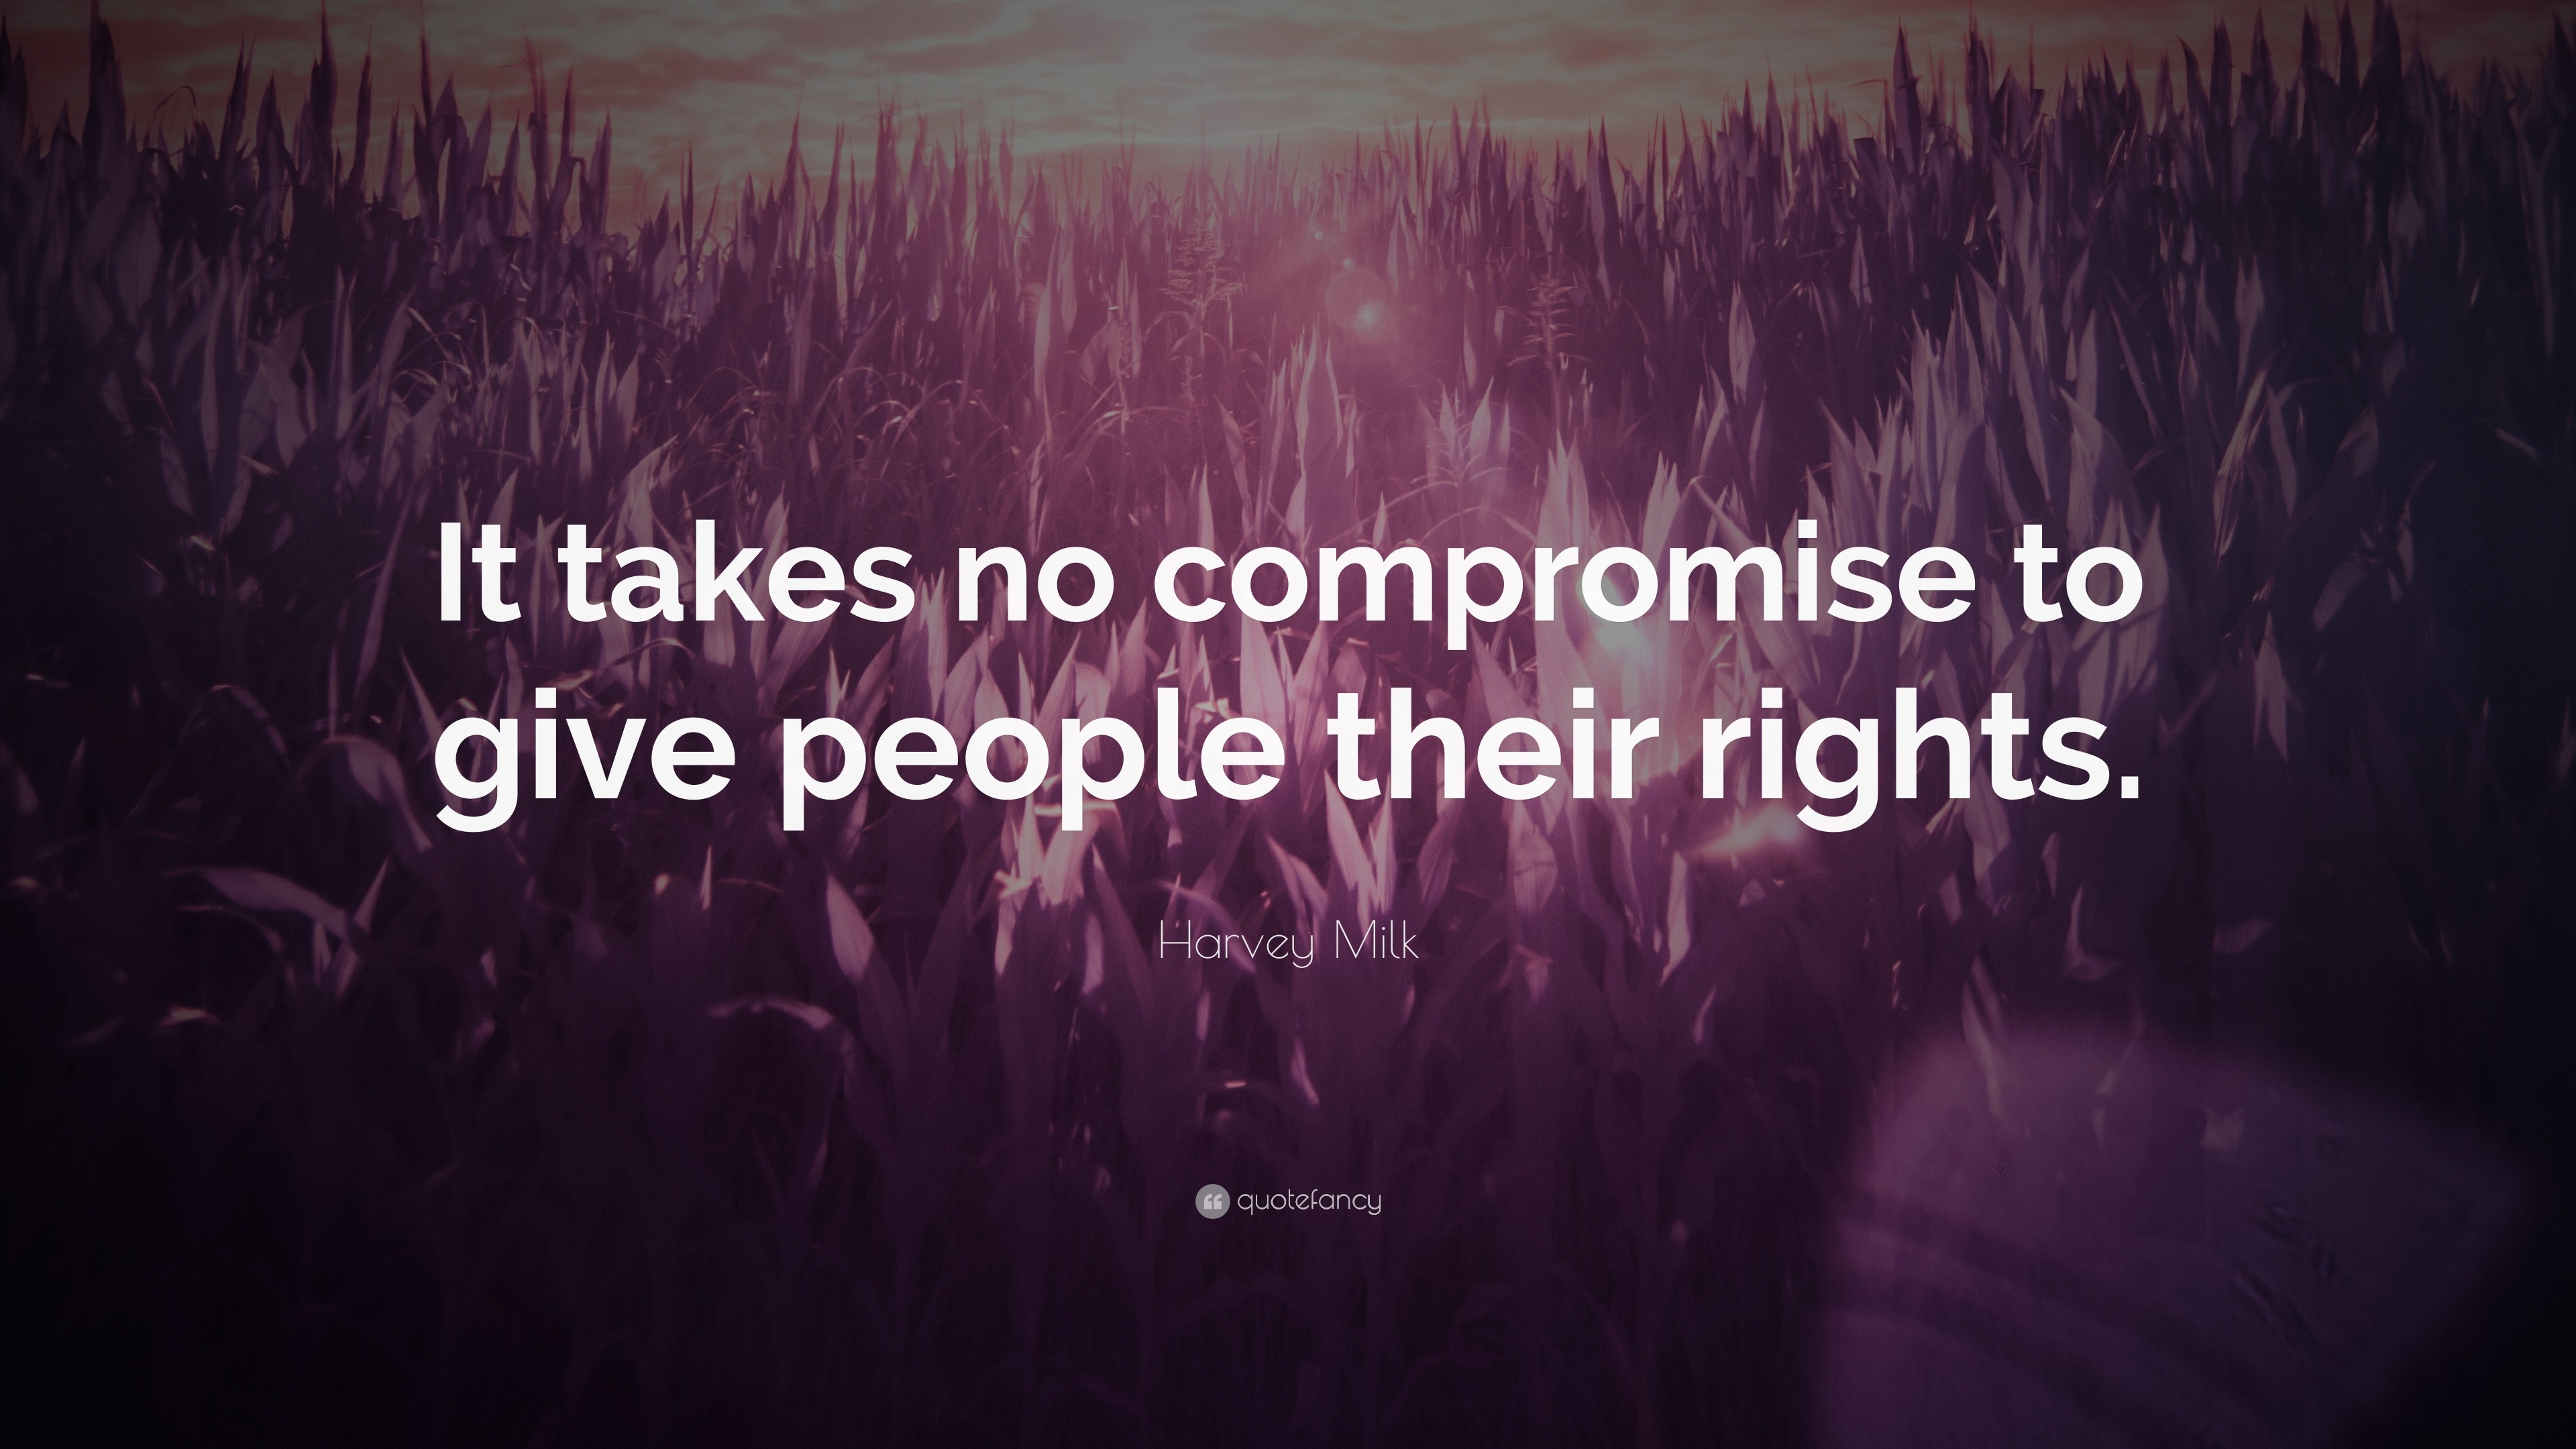 Harvey Milk Quote: “It takes no compromise to give people their